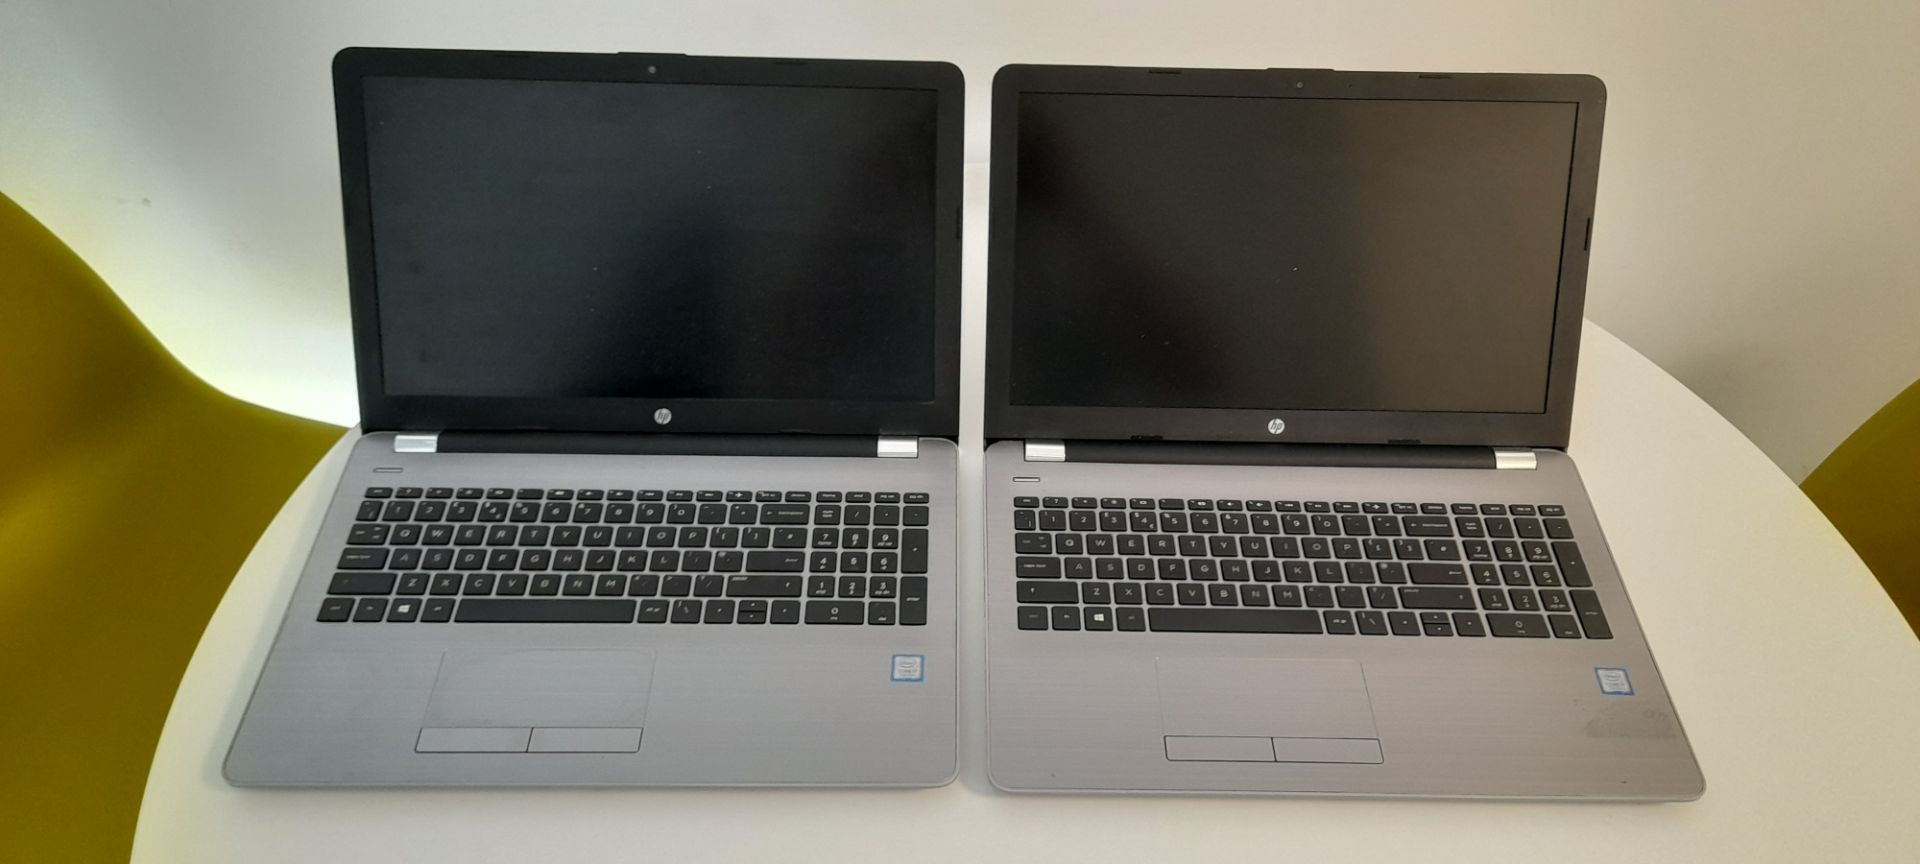 2x HP 3168NGW laptop with intel core i7, 7th Gen. Collection from Canary Wharf, London, E14 - Image 2 of 12